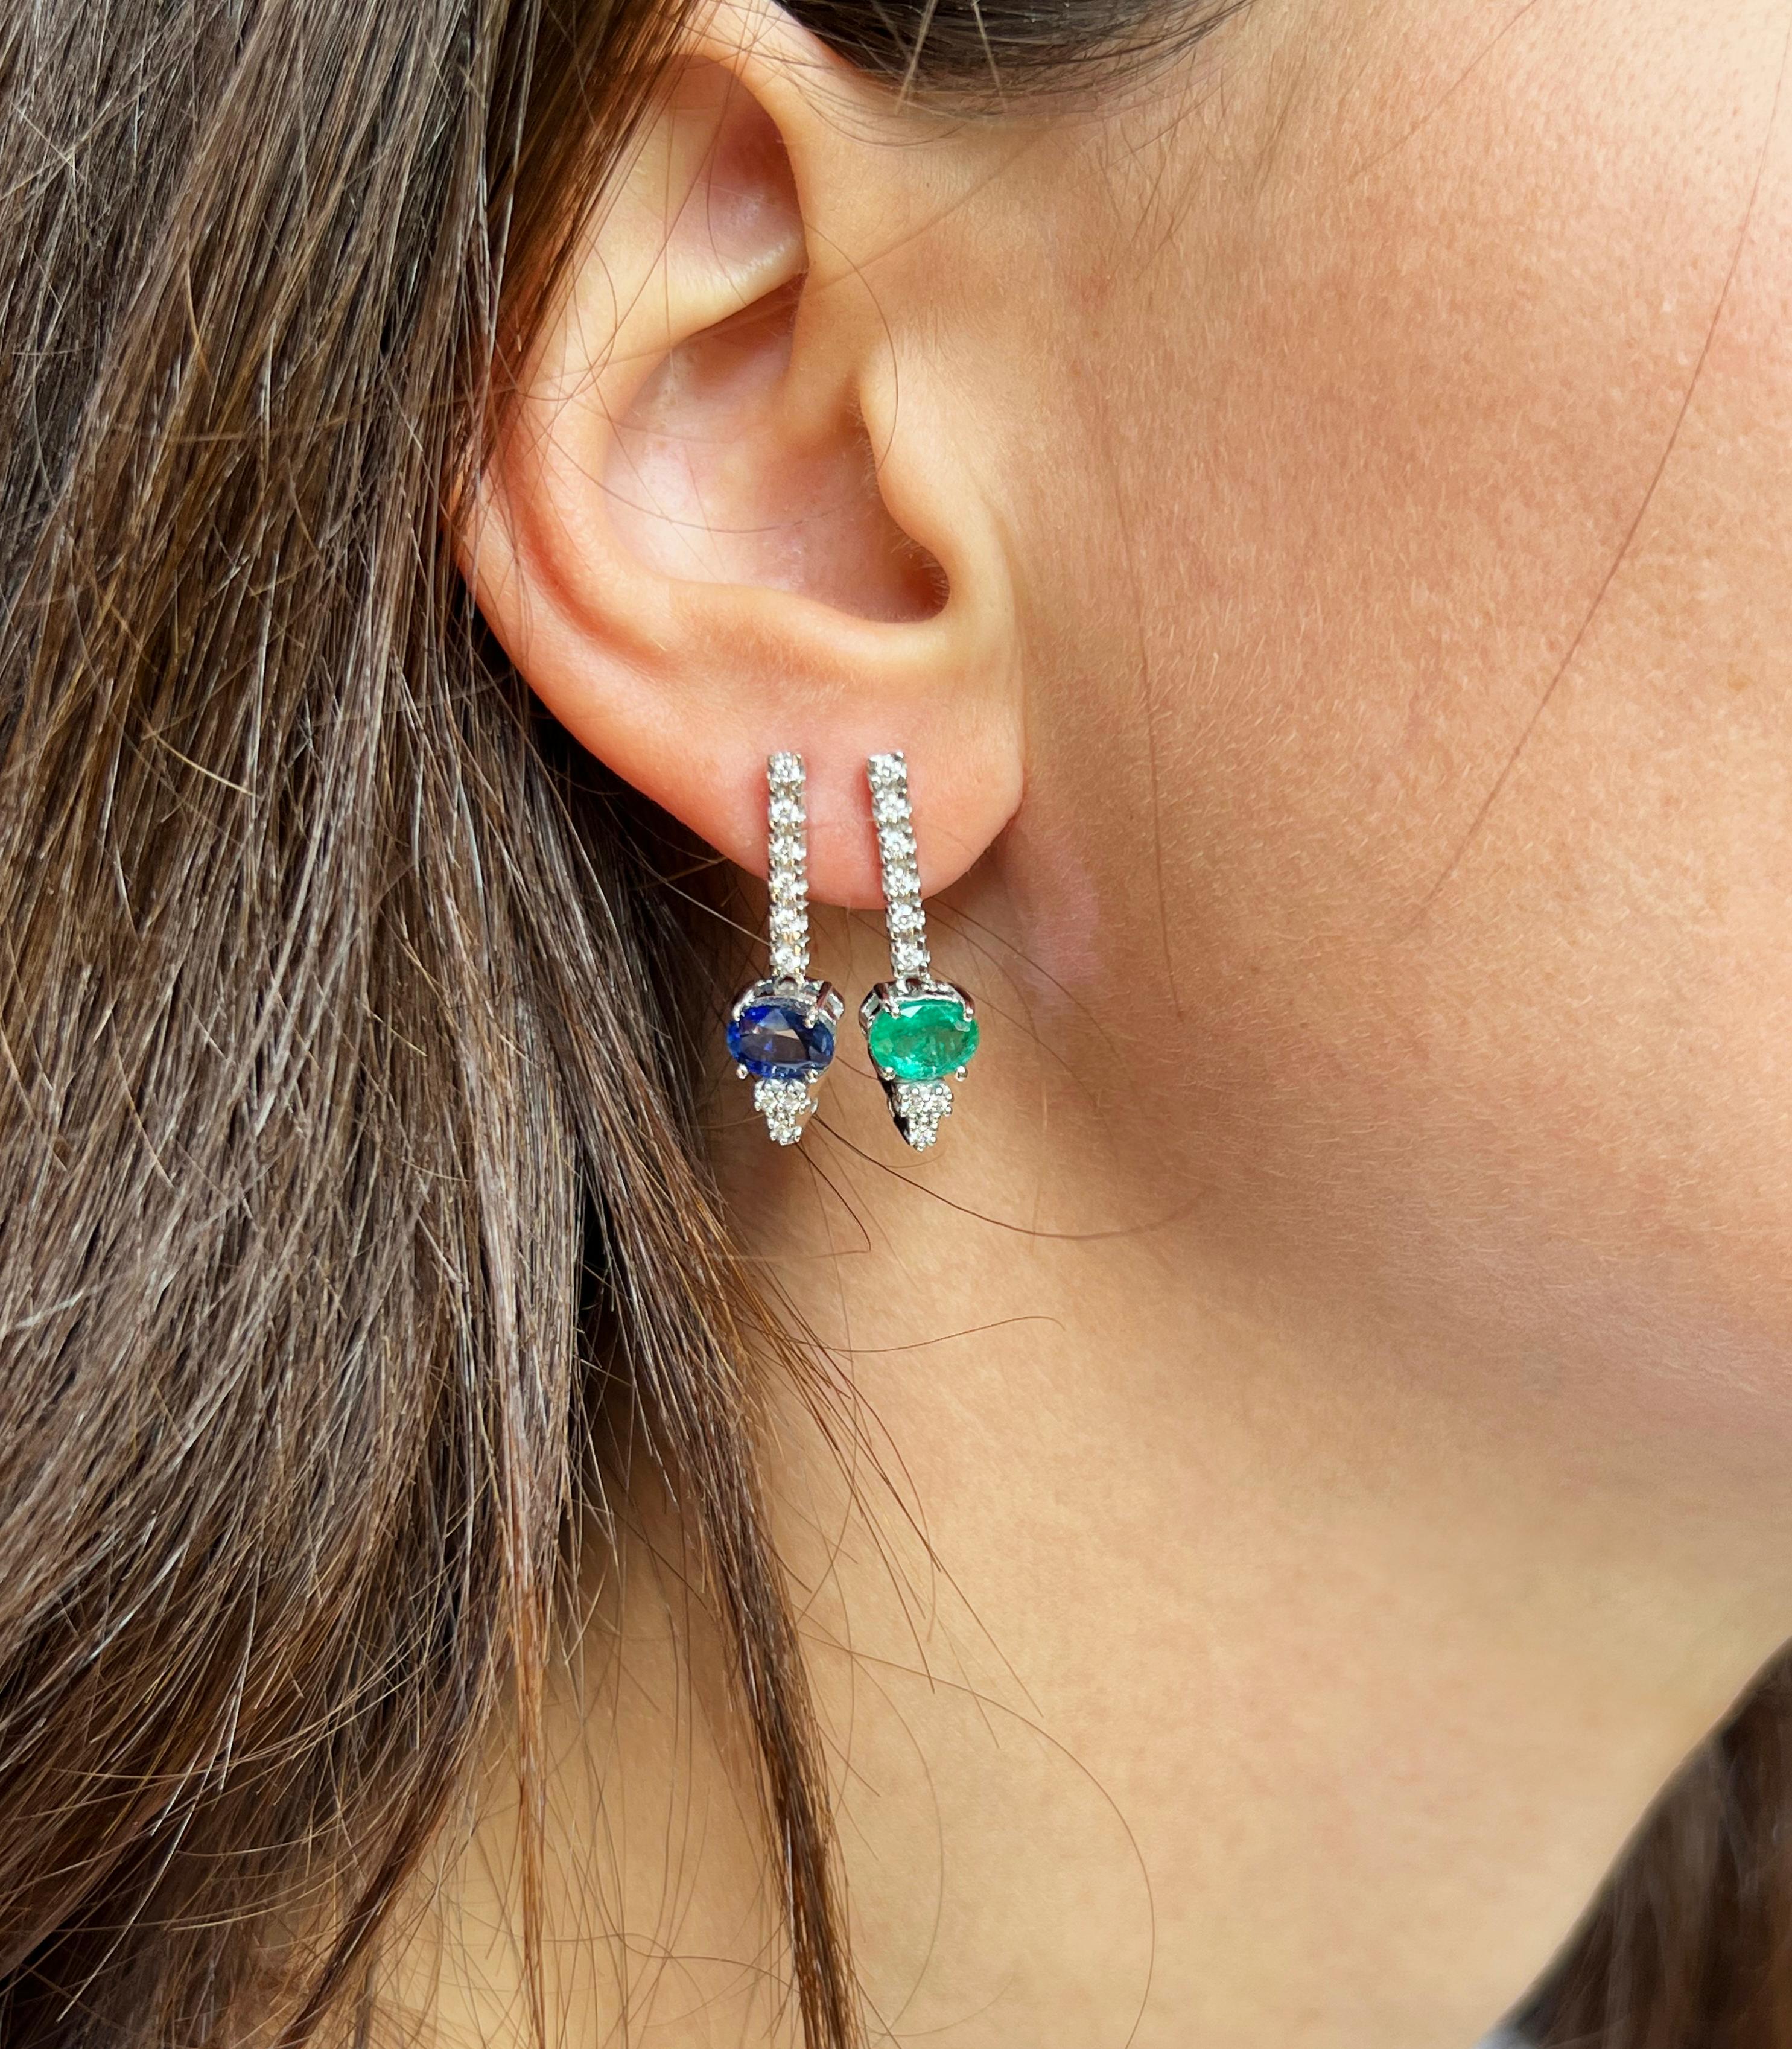 18Kt White Gold with White Diamonds Emerald Blue Zapphire Classic Earrings
g.4.30
having 2 earrings with different precious stones will seem like you always have new earrings, you can combine them with many clothes.
g.4.30   diamonds cts 0.25       